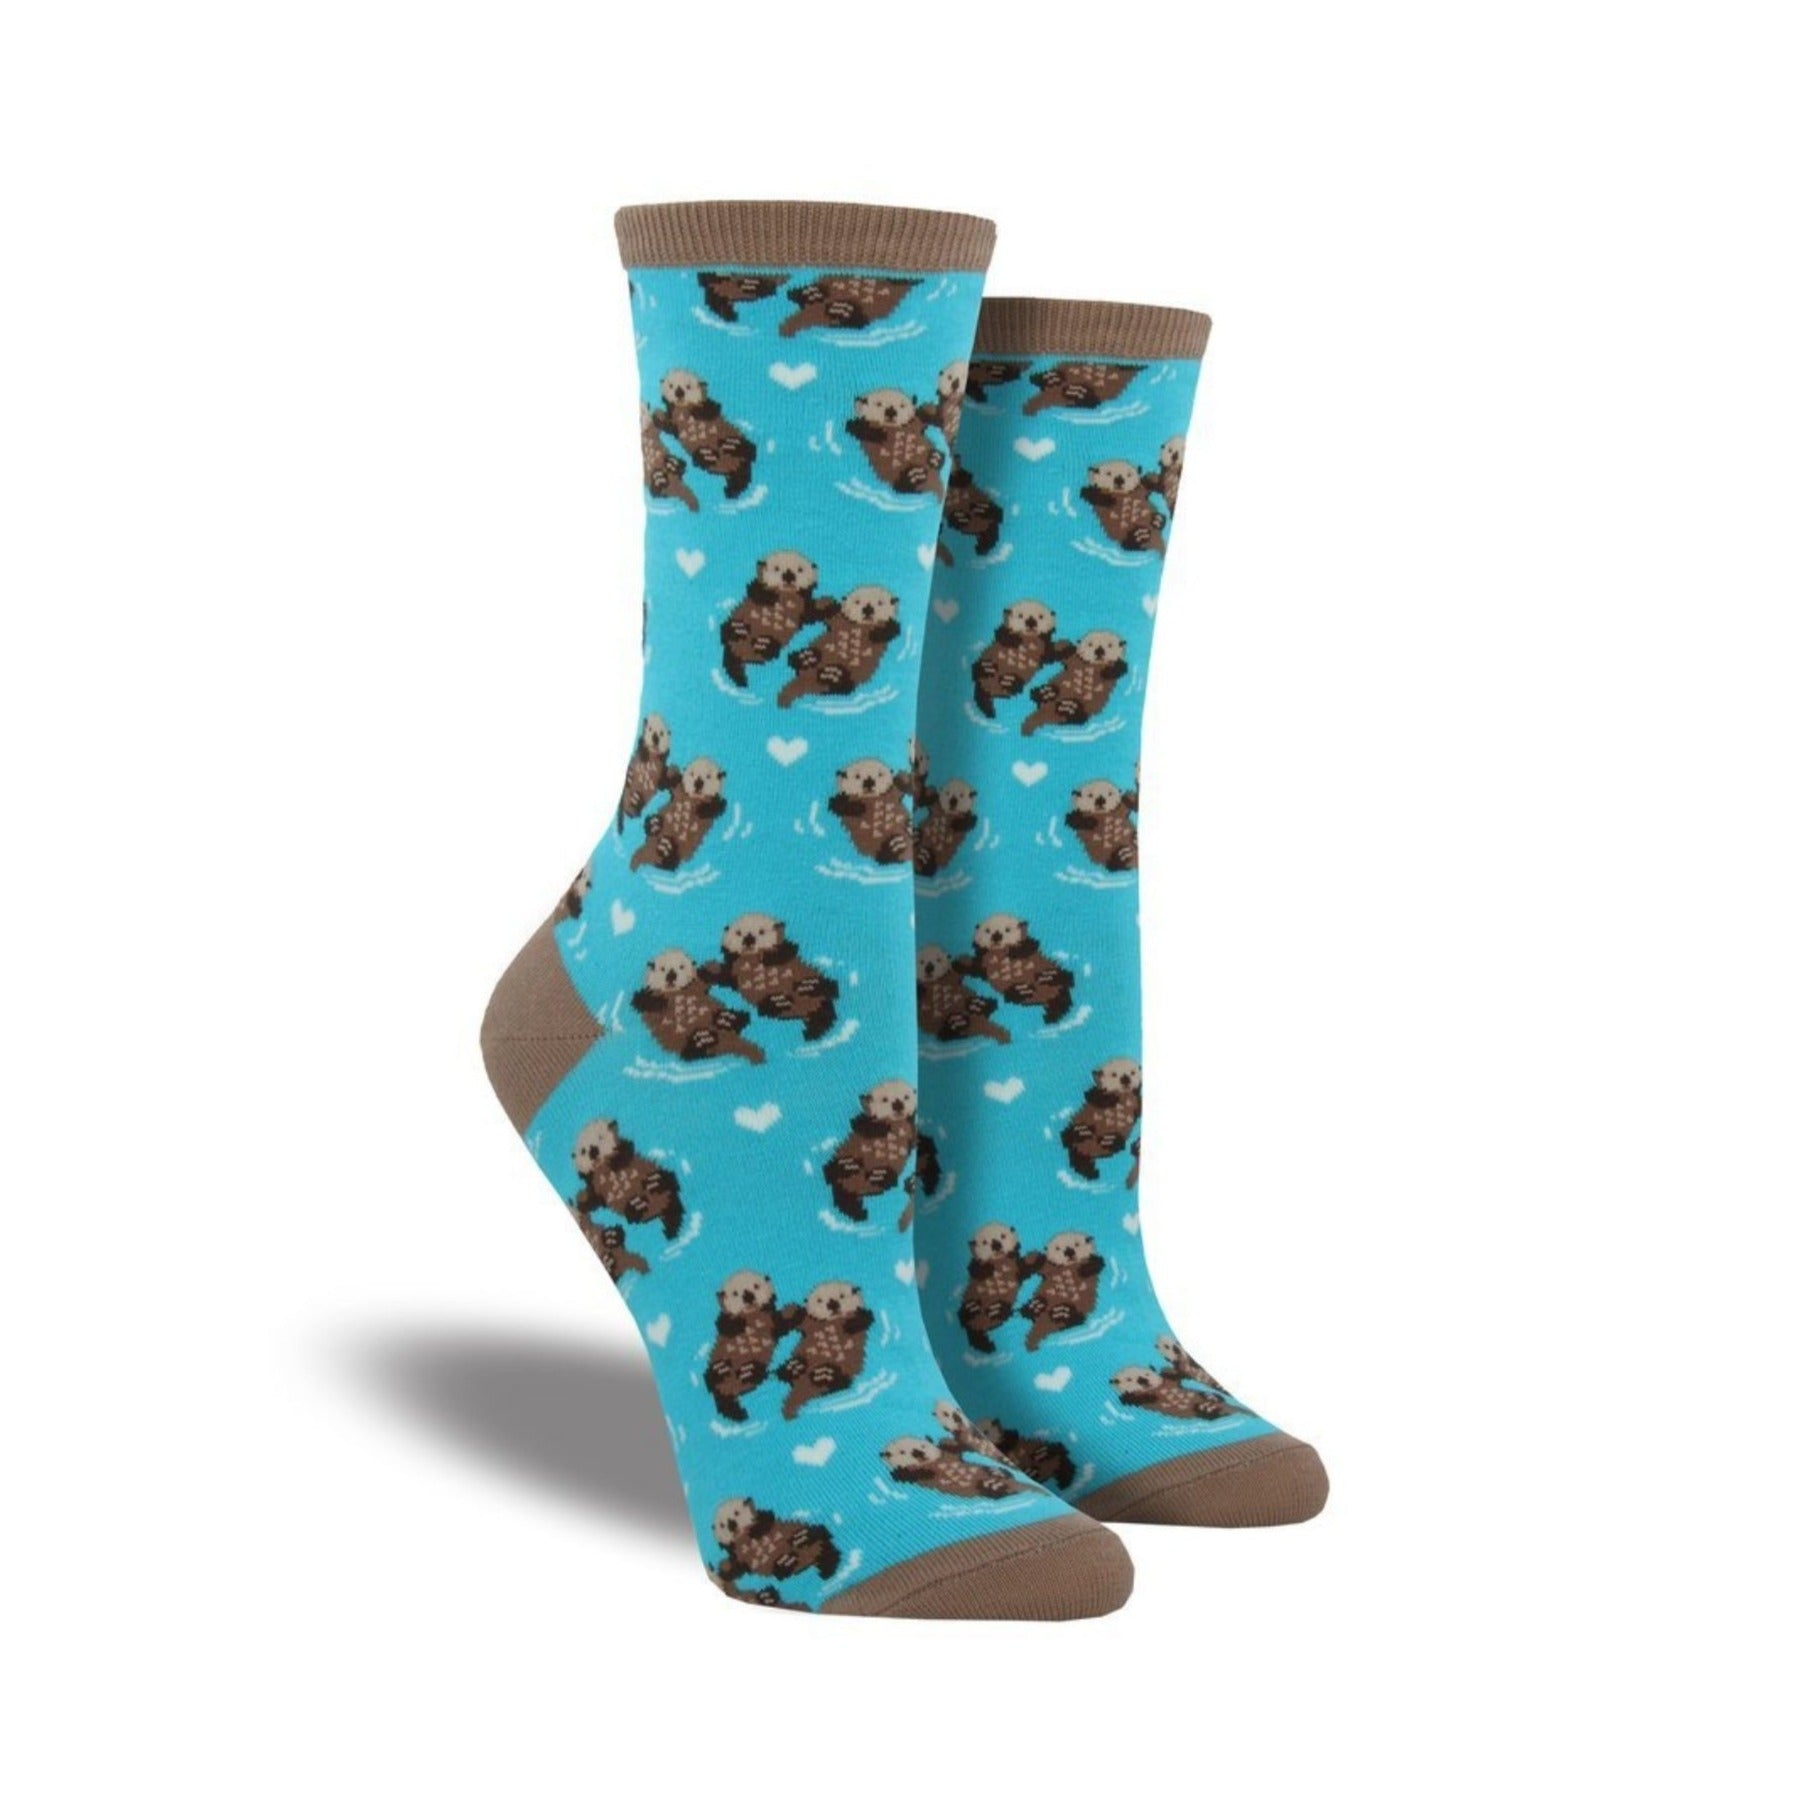 Light blue socks with 2 otters floating together pattern